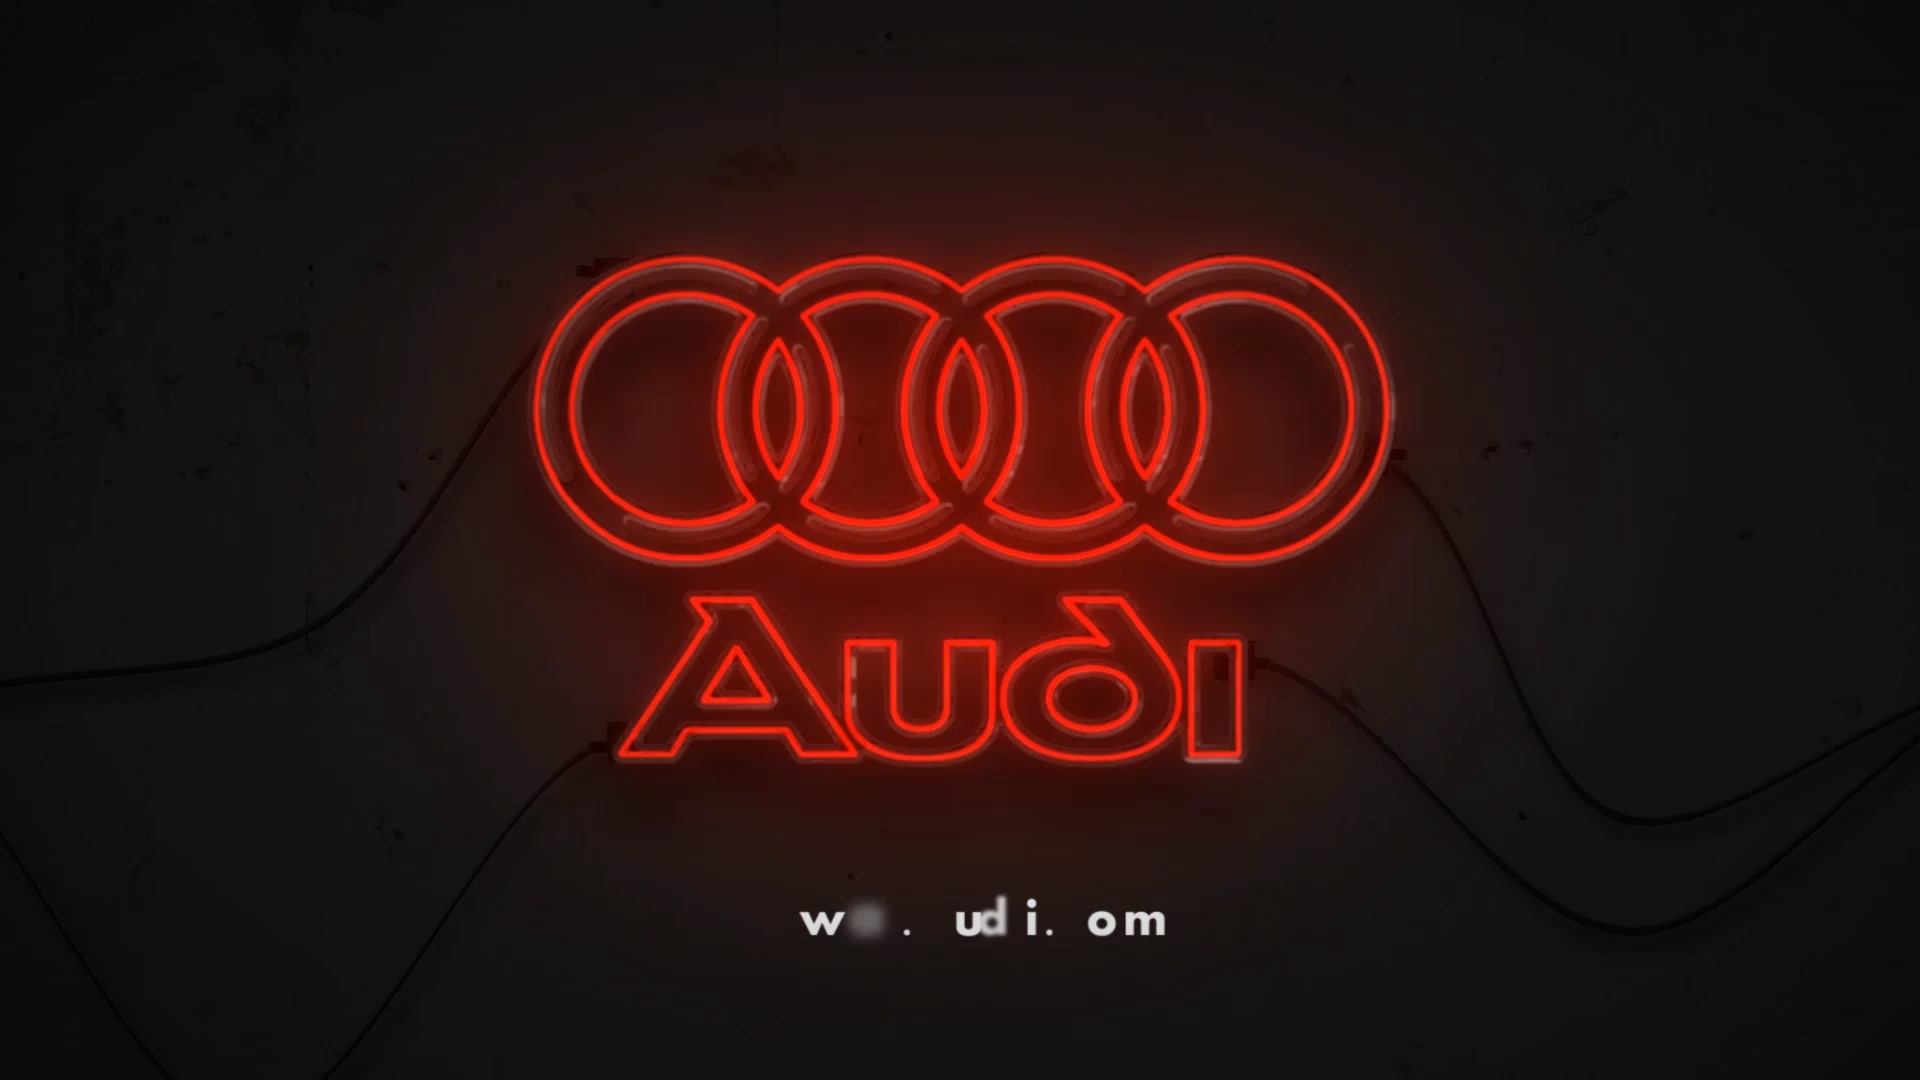 Make 3d logo intro neon light animation in 24h full hd 1080p by Ozhang |  Fiverr